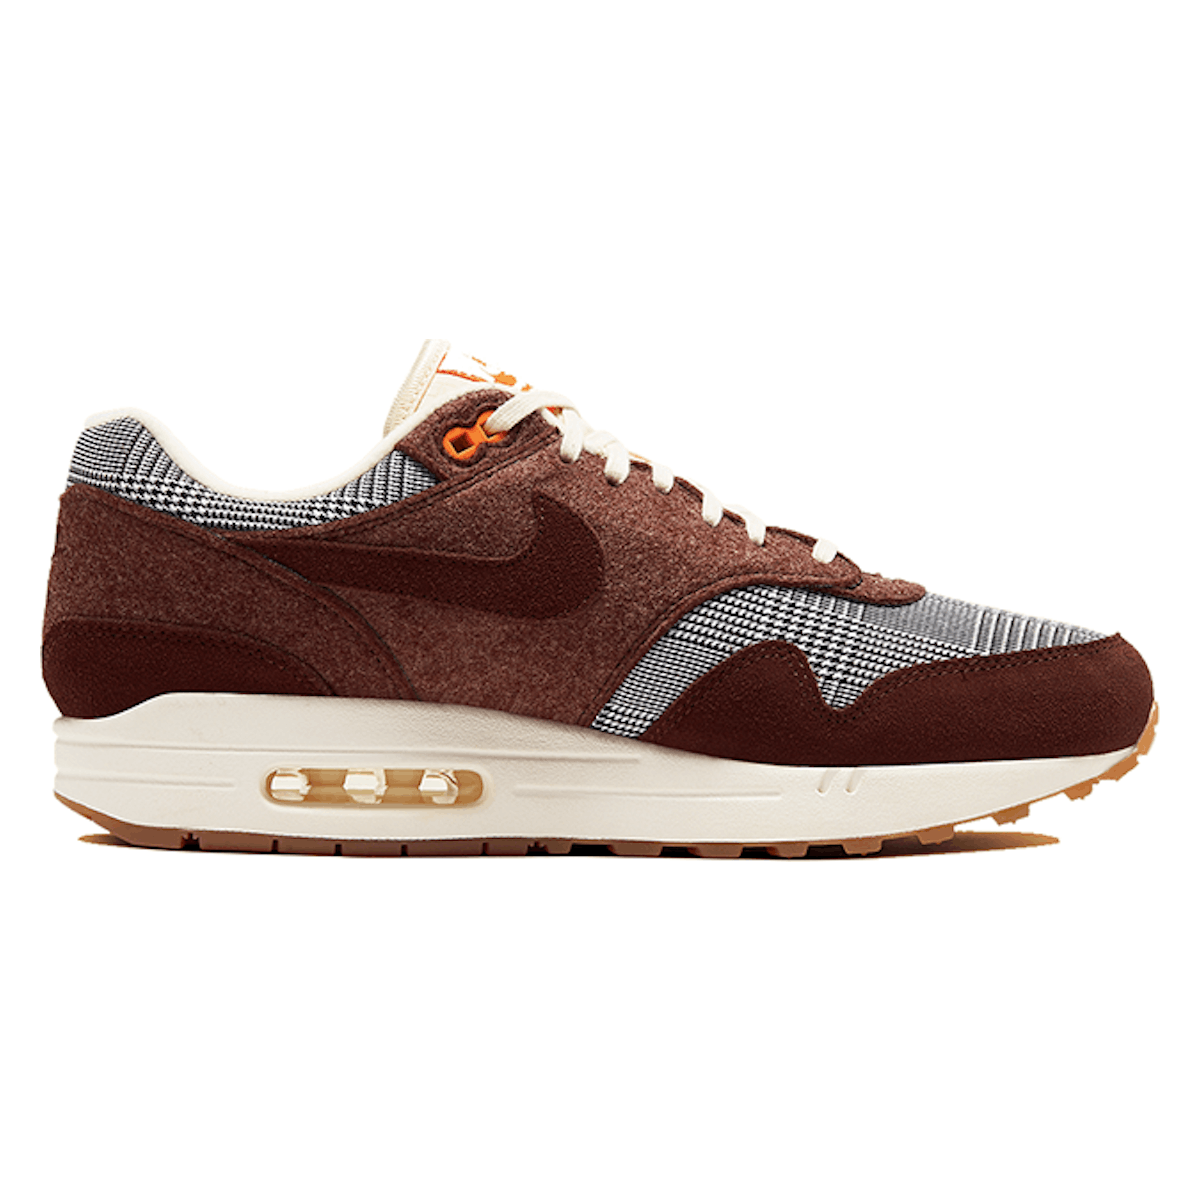 Nike Air Max 1 "Houndstooth"